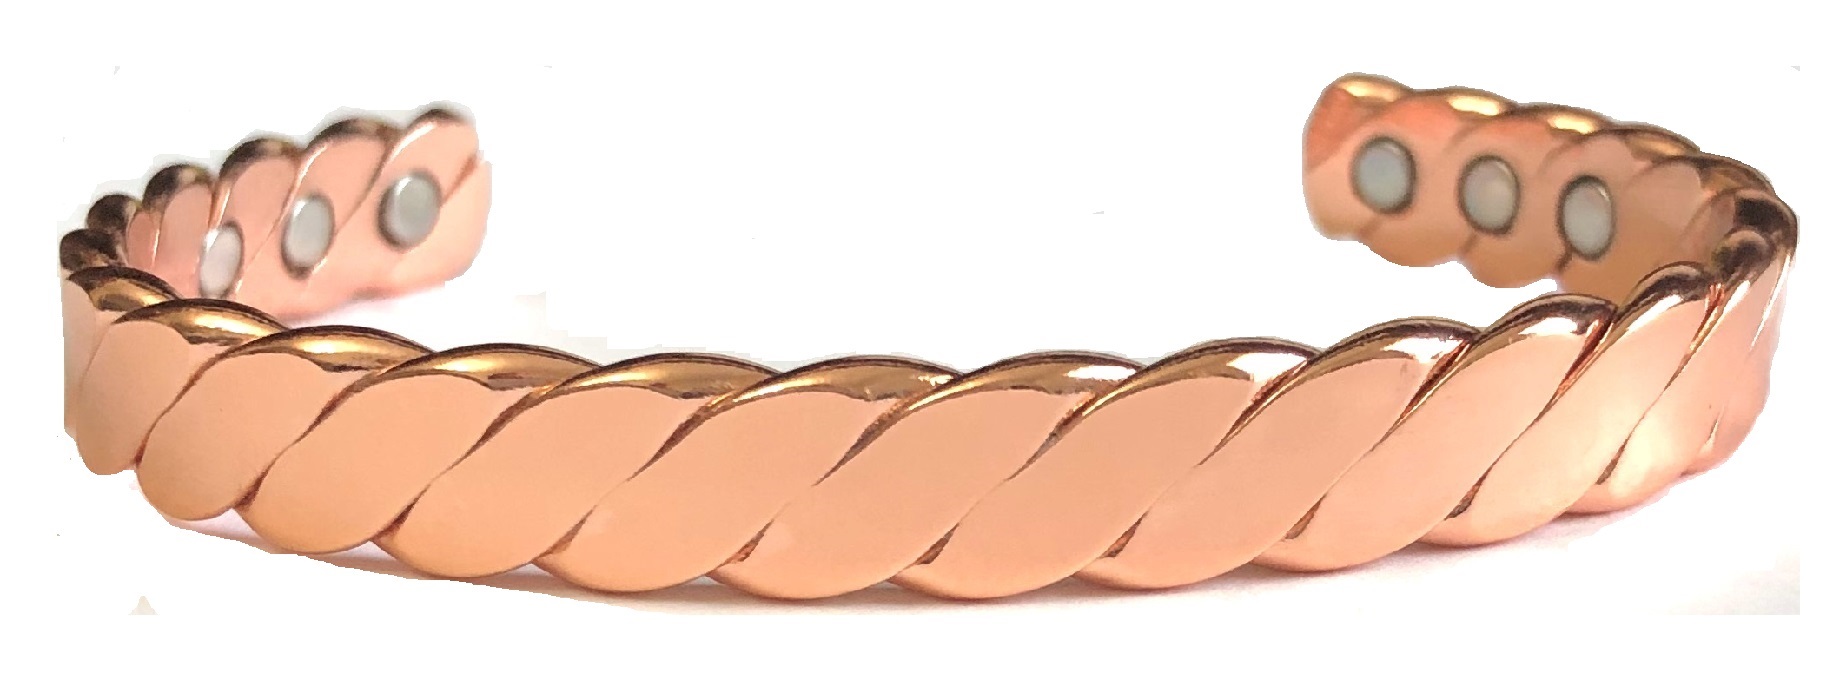 Solid Twist Copper Cuff Magnetic Therapy Bangle Bracelet #MBG515